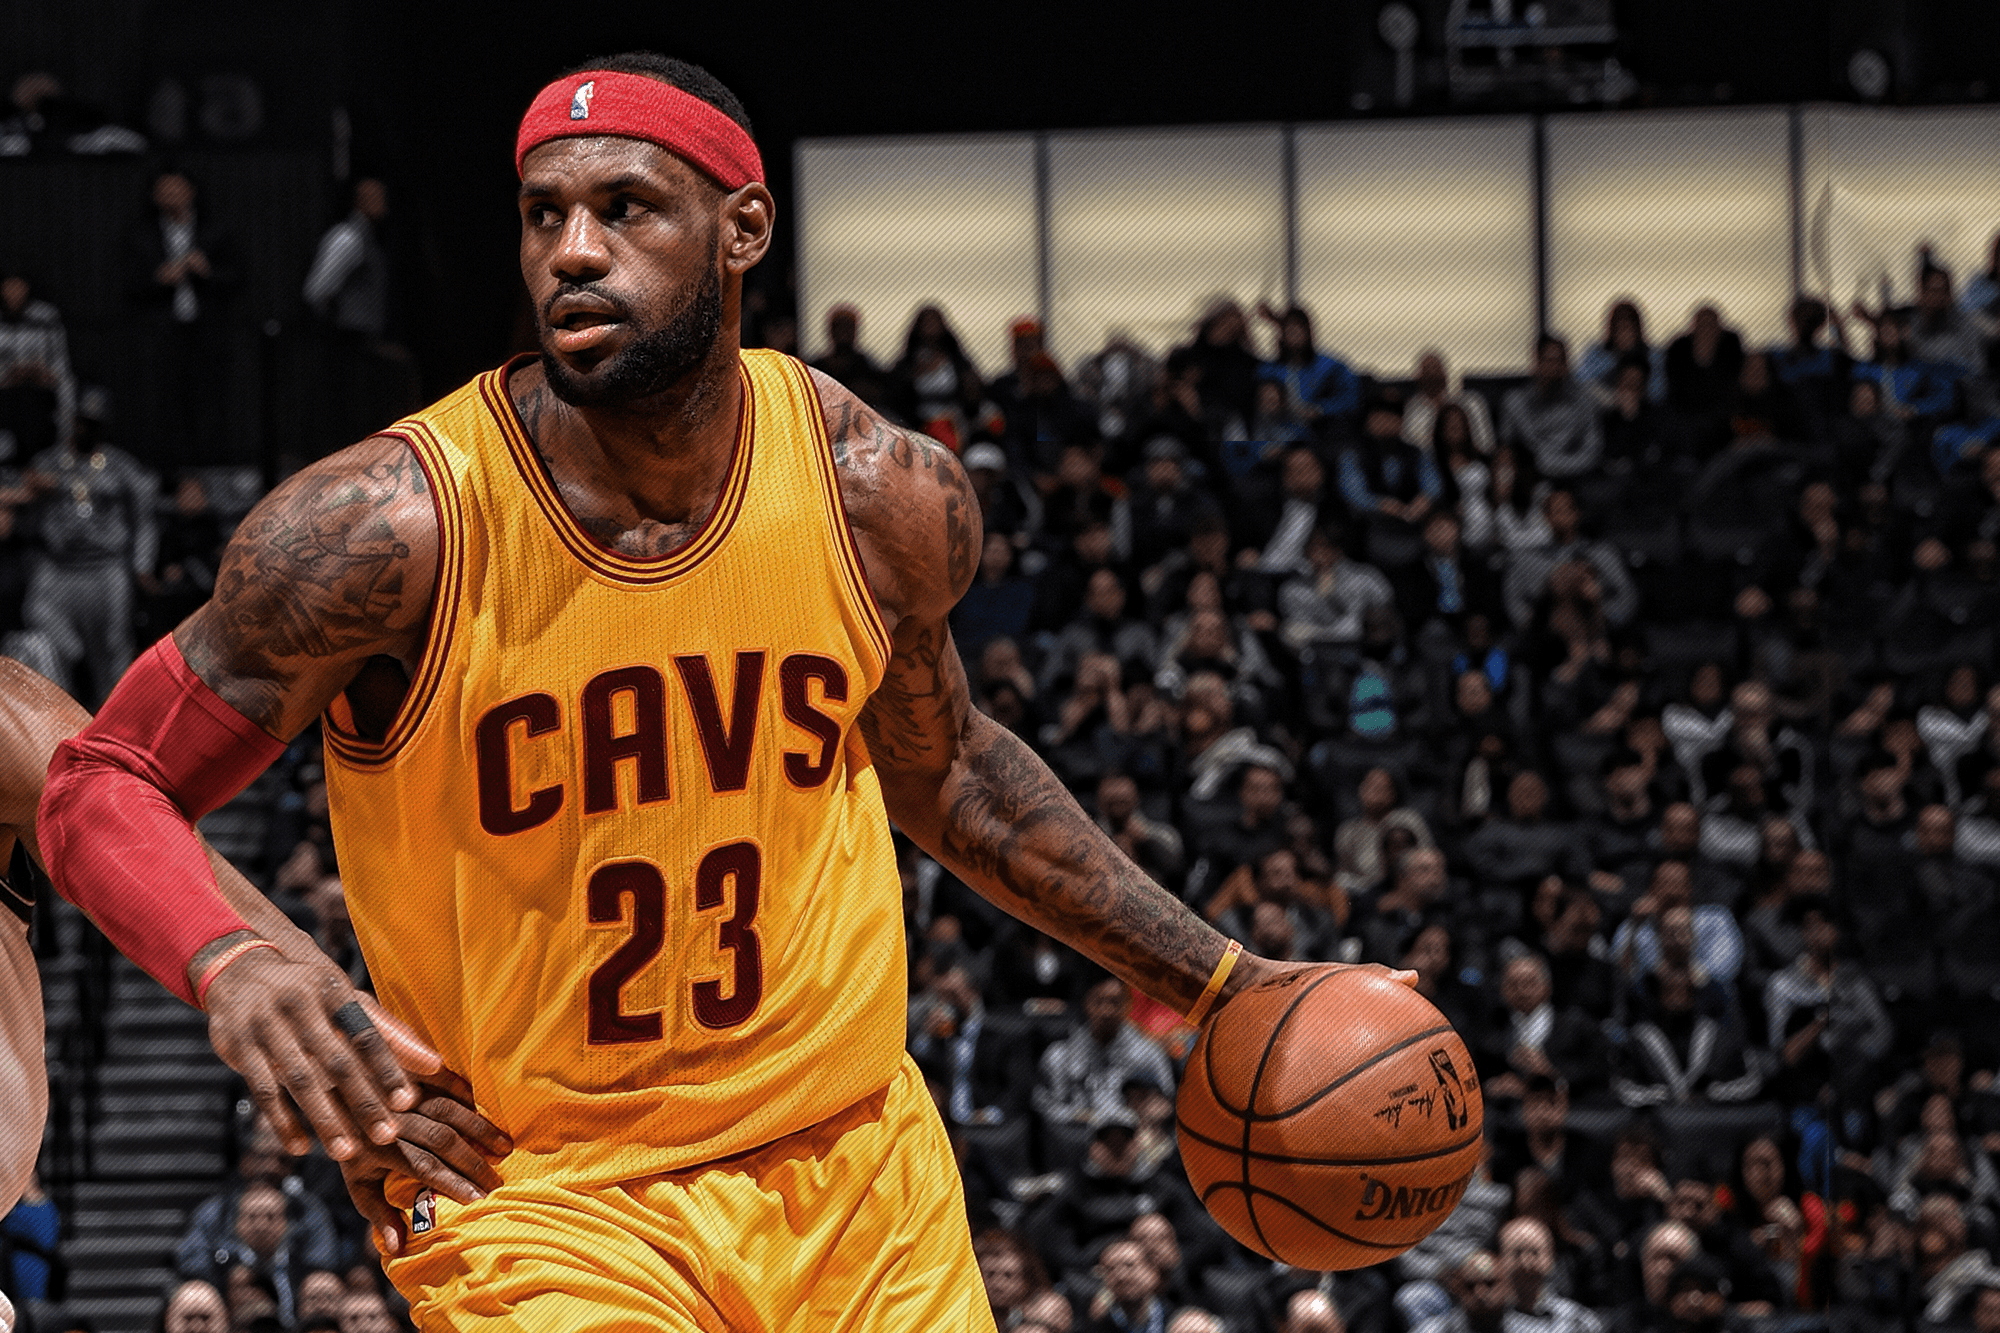 A Good Night for Lebron James